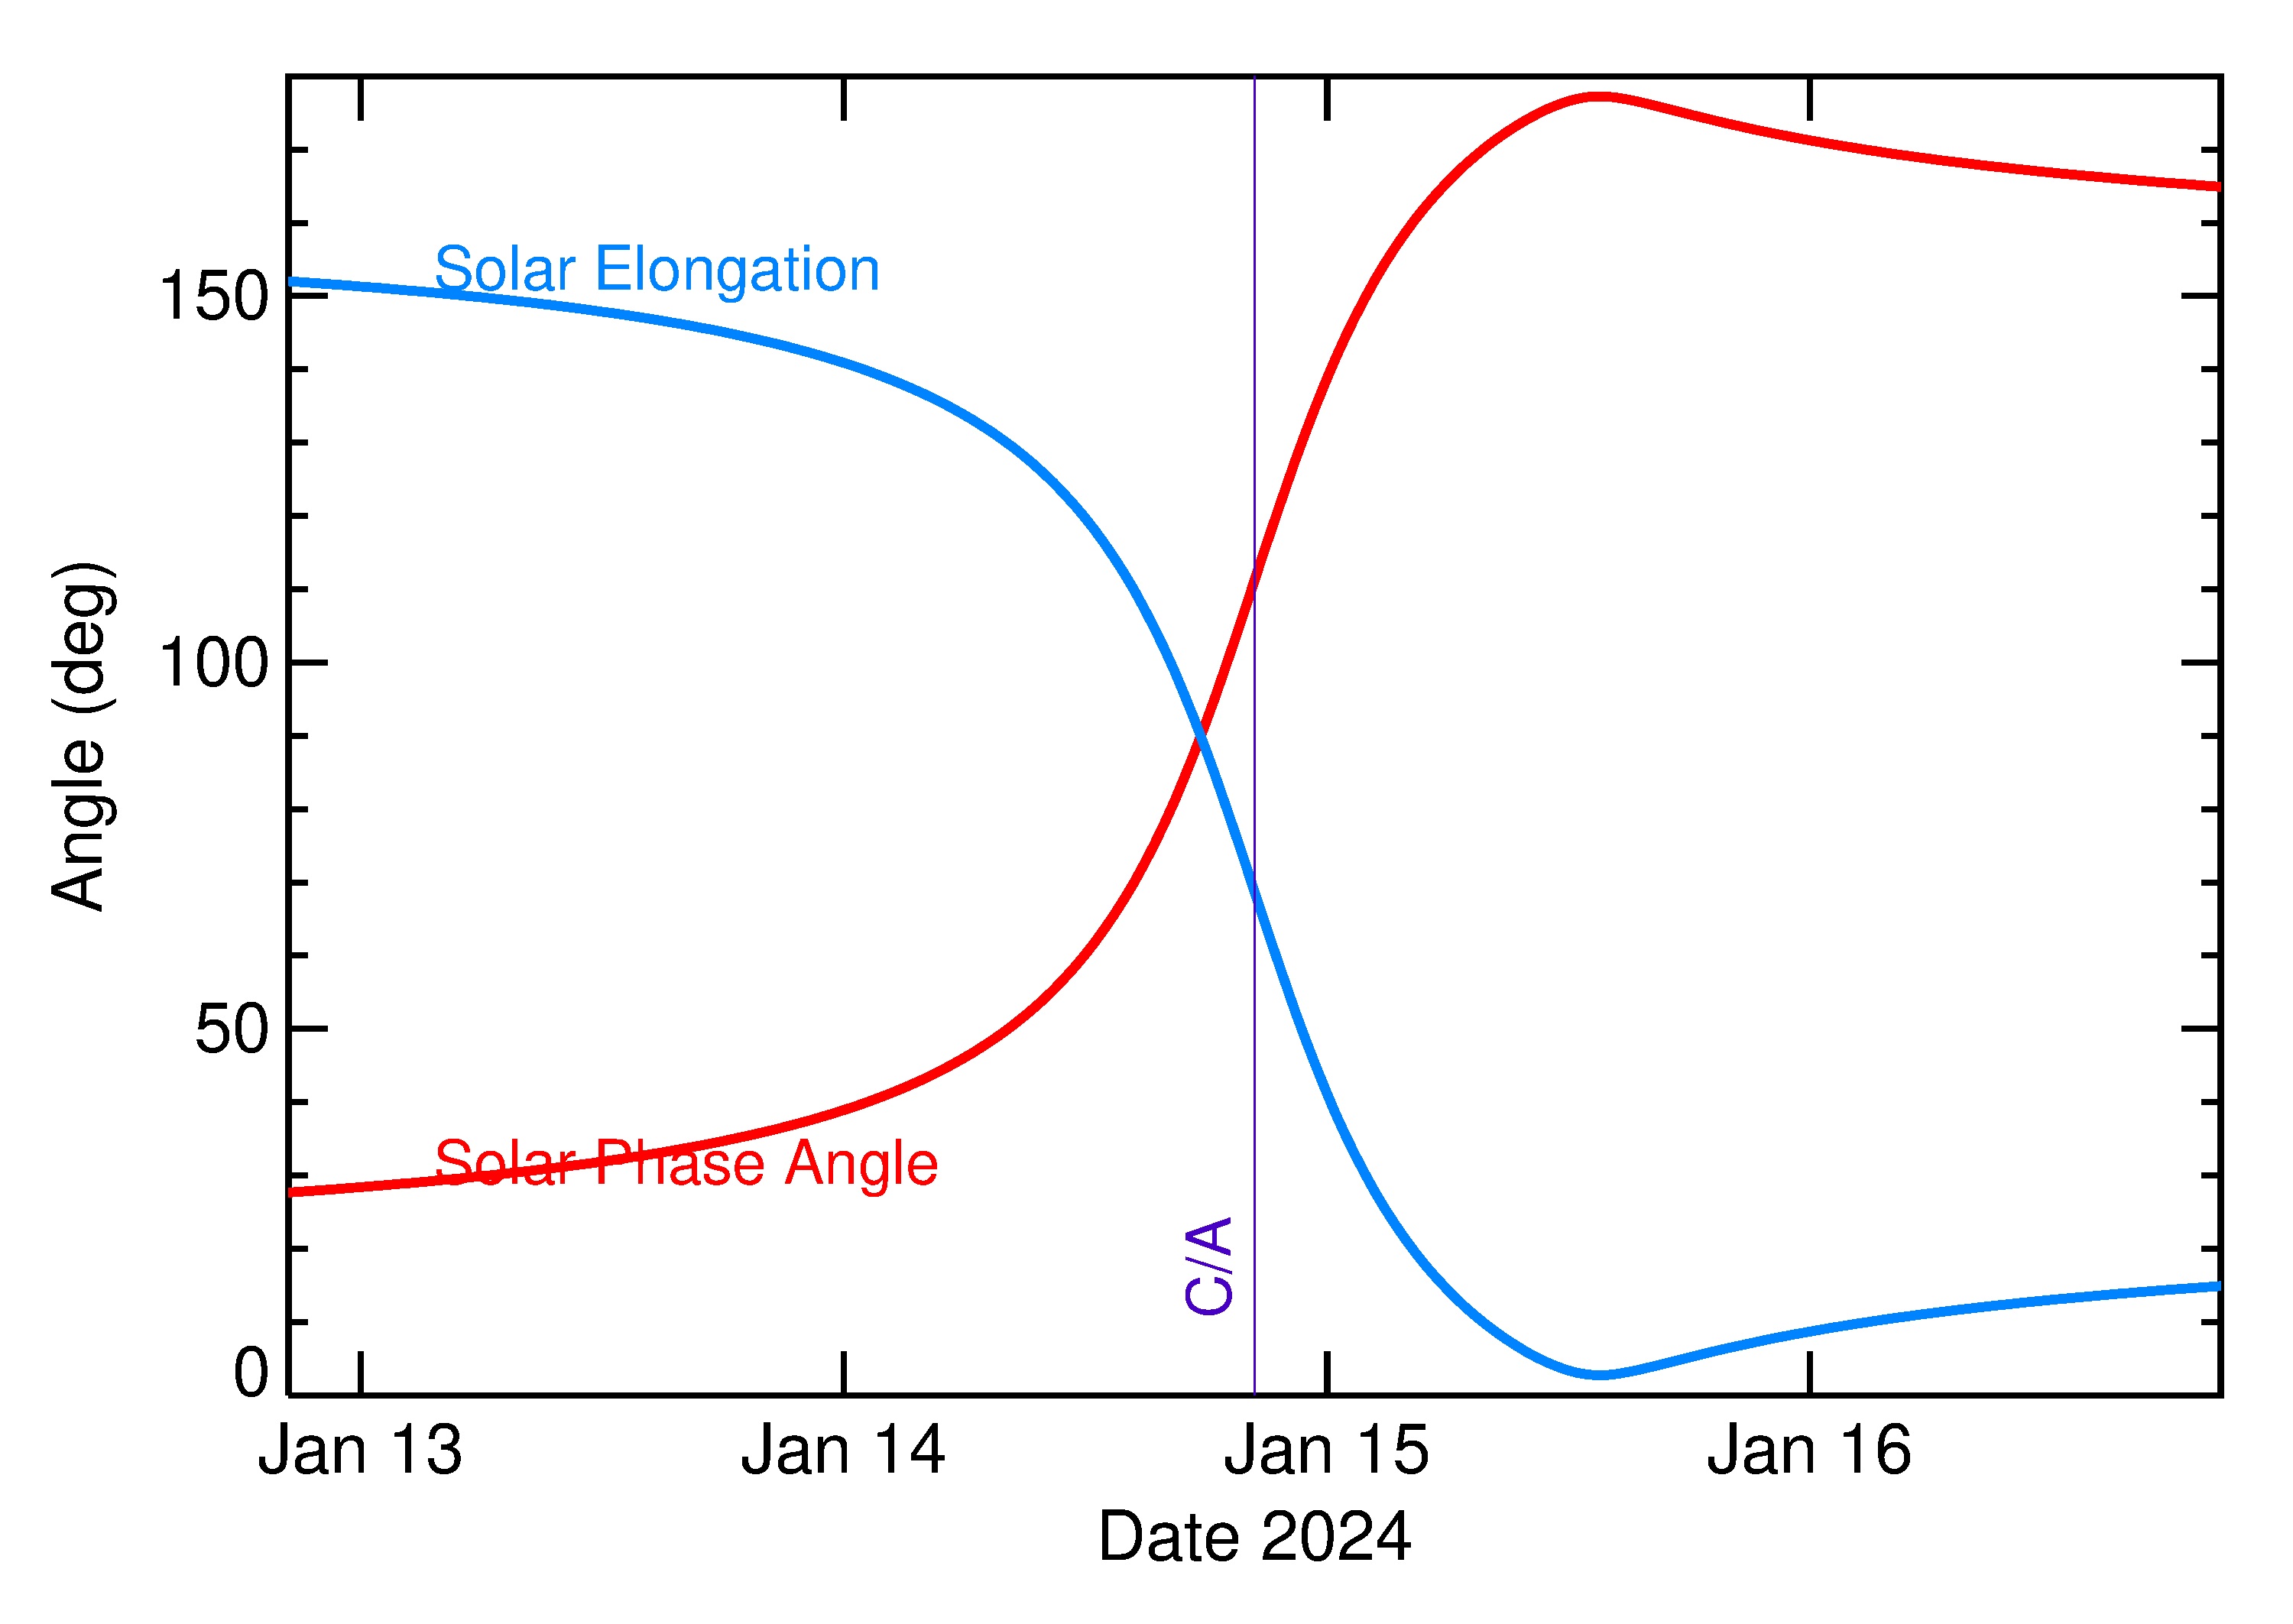 Solar Elongation and Solar Phase Angle of 2024 AZ3 in the days around closest approach